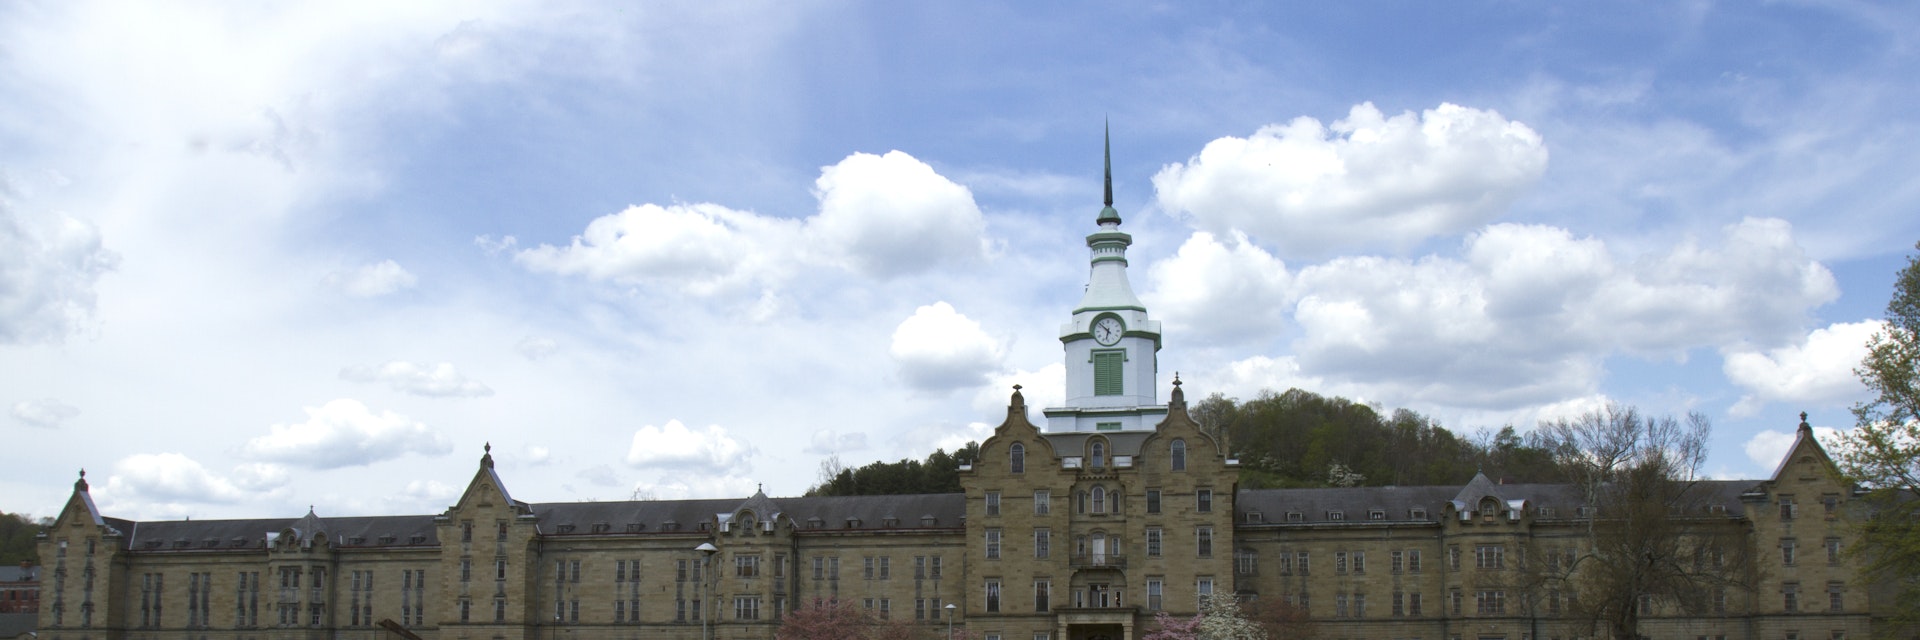 The Trans-Allegheny Lunatic Asylum building and grounds.